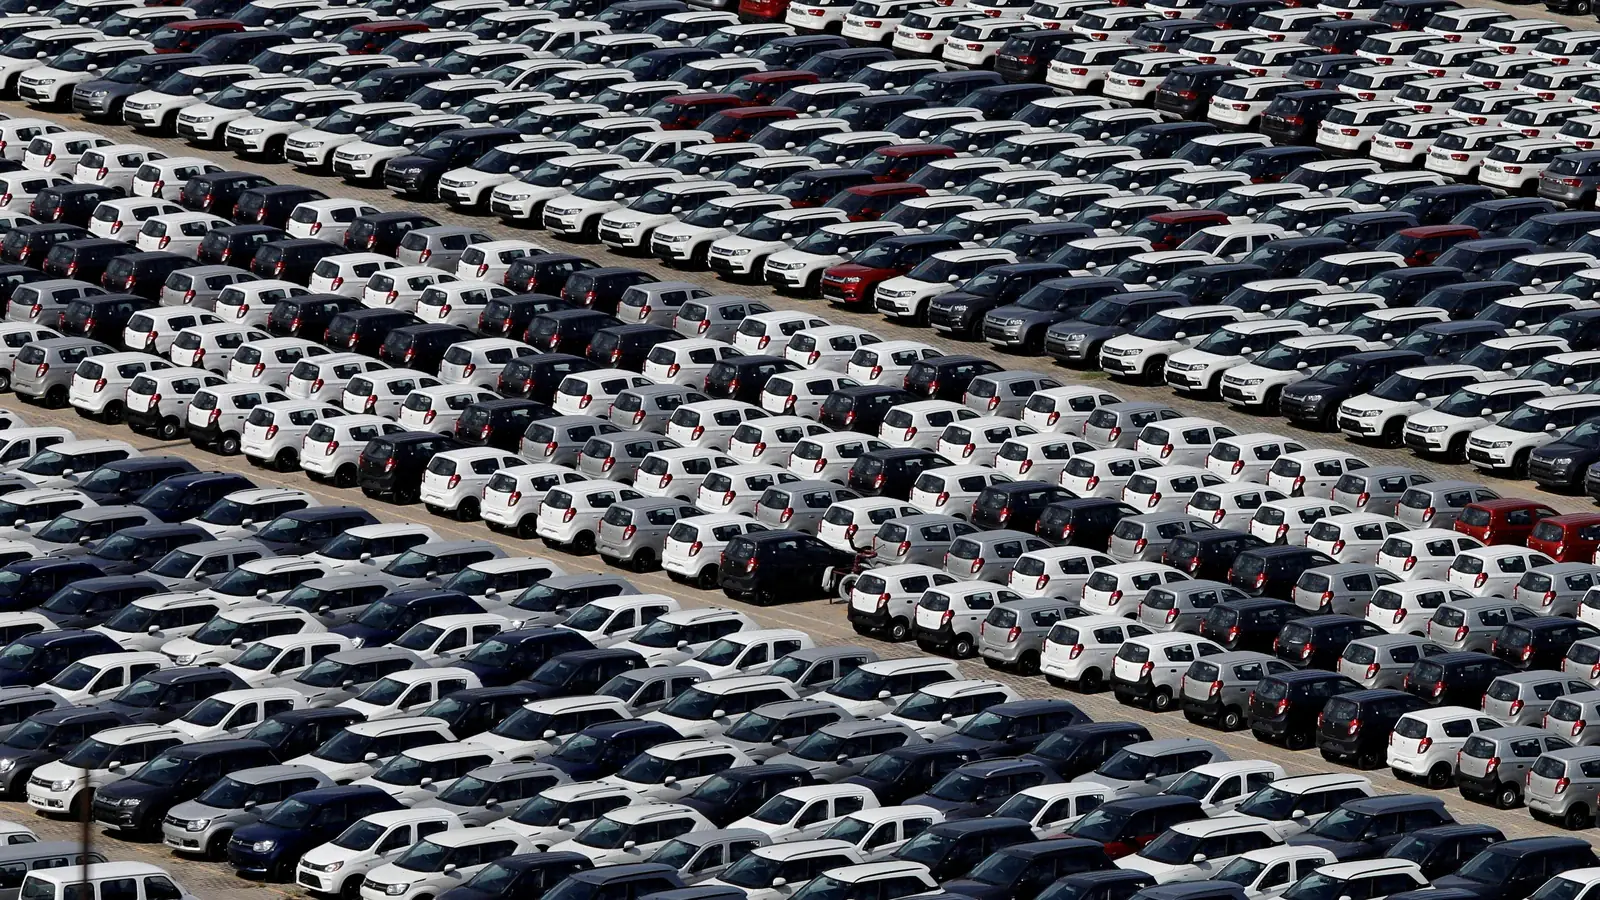 Passenger vehicle exports increased by 2.68 lakh units in the last four years, know which company exported the most